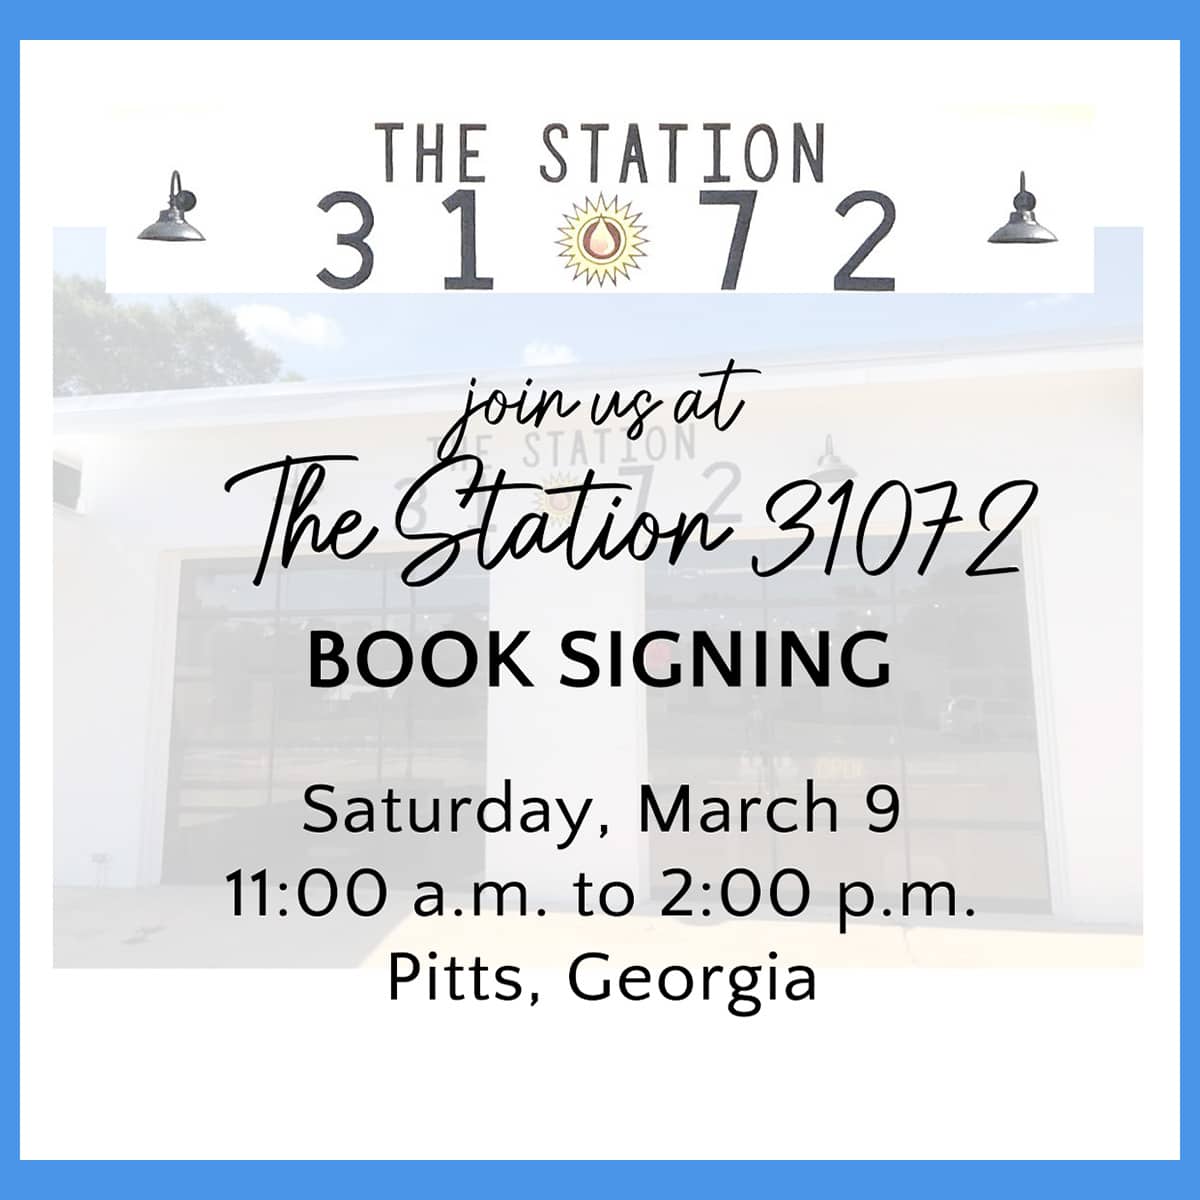 Event Announcement - The Station 31072